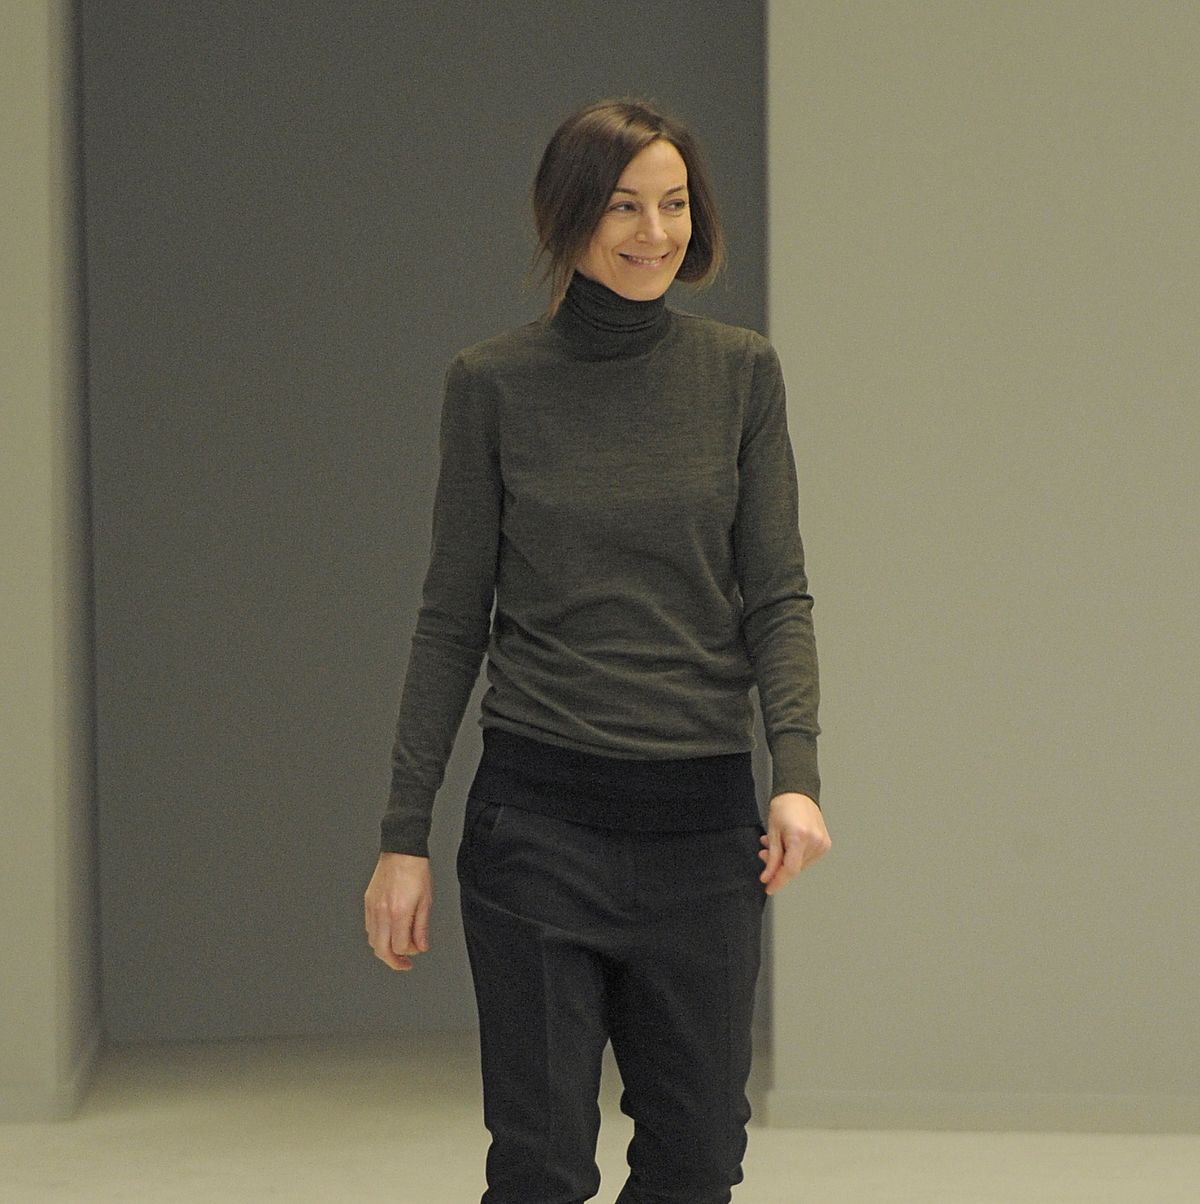 Phoebe Philo's Own Brand Is Finally Upon Us